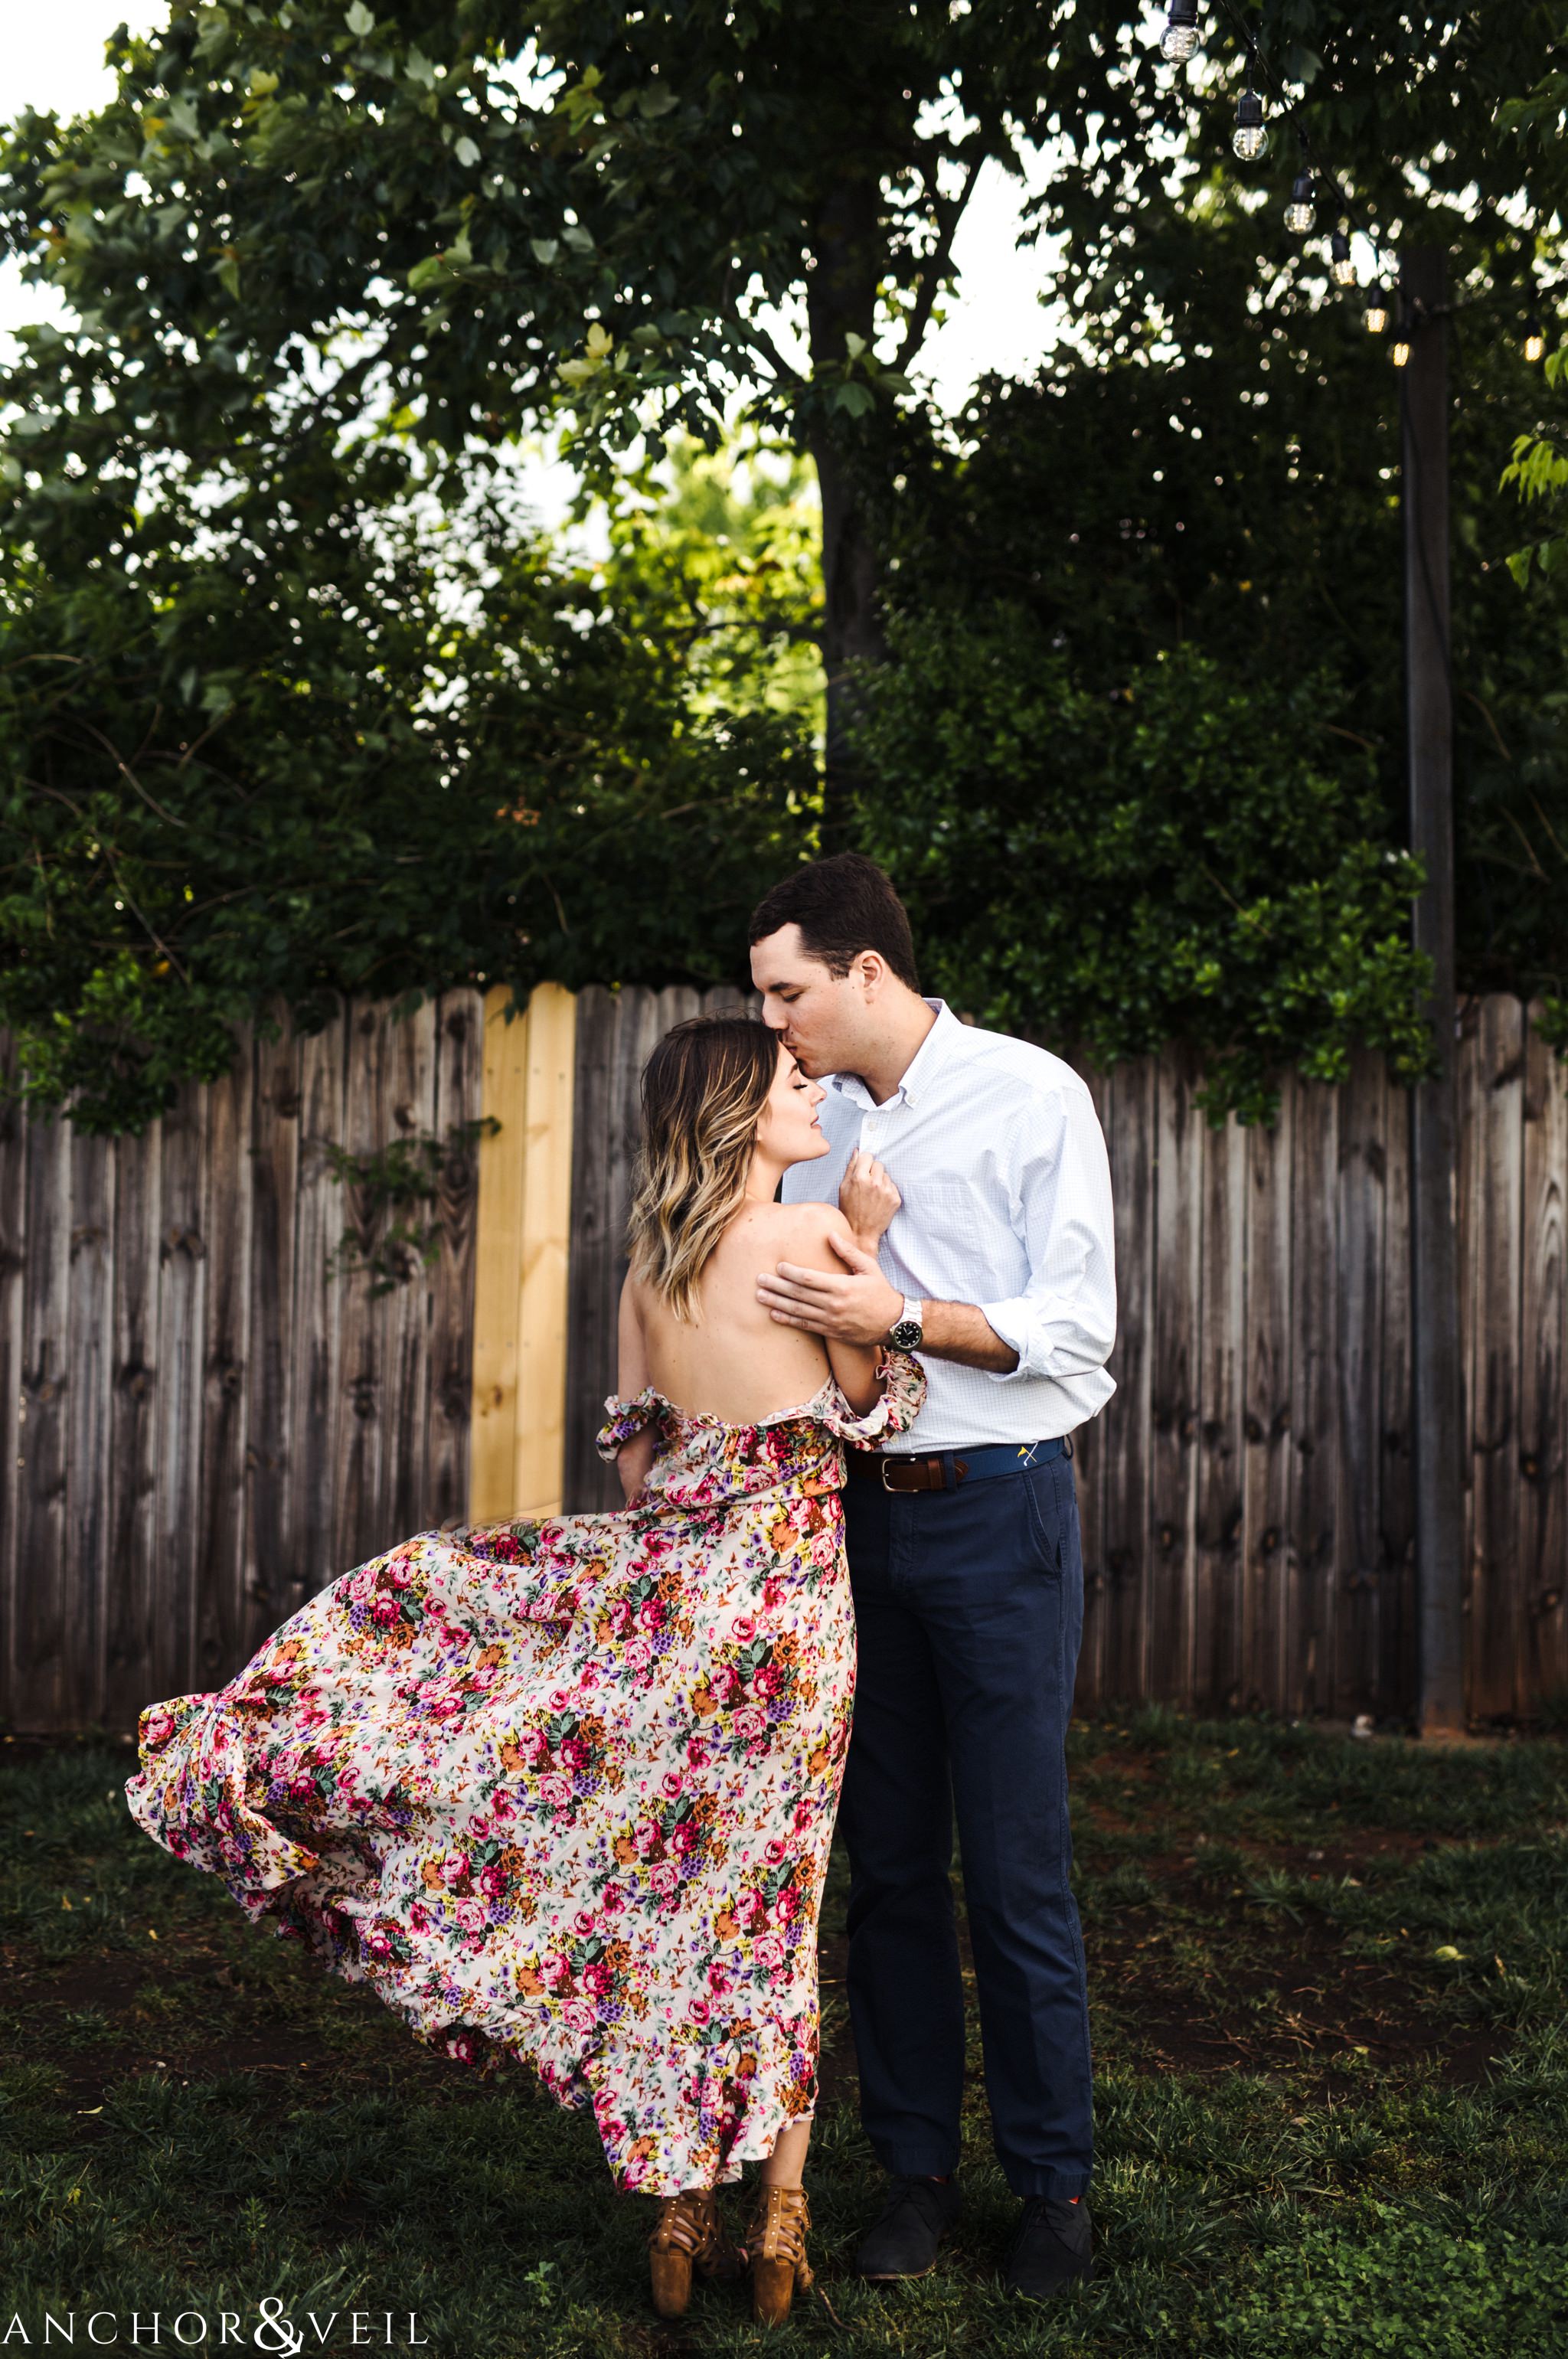 emir blown dress during the Uptown Charlotte Sycamore Brewery Engagement Session